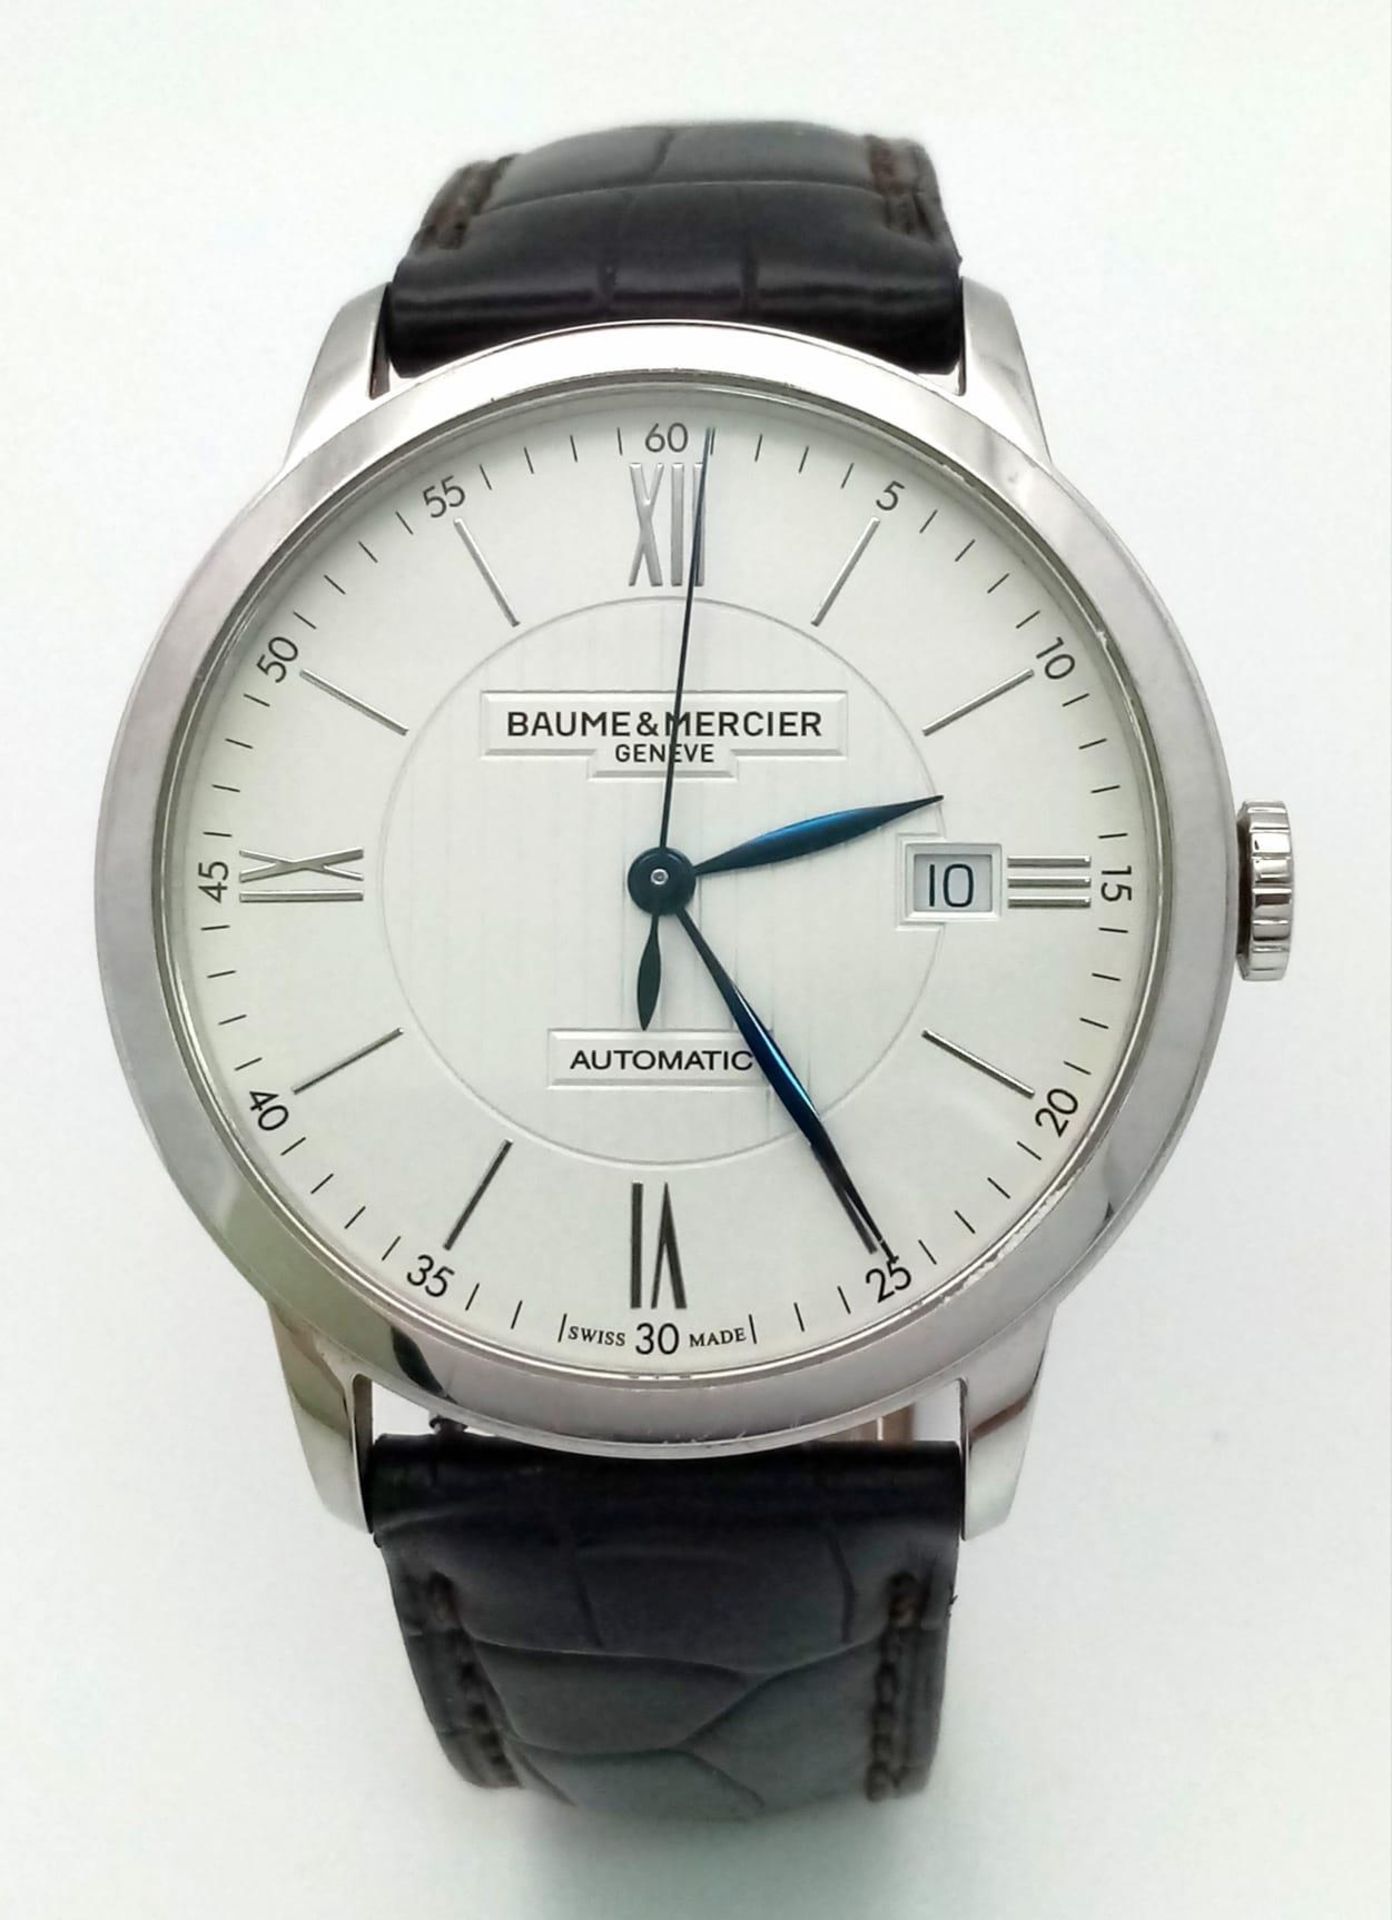 A Baume and Mercier Automatic Gents Watch. Original leather strap. Stainless steel case with - Image 2 of 8